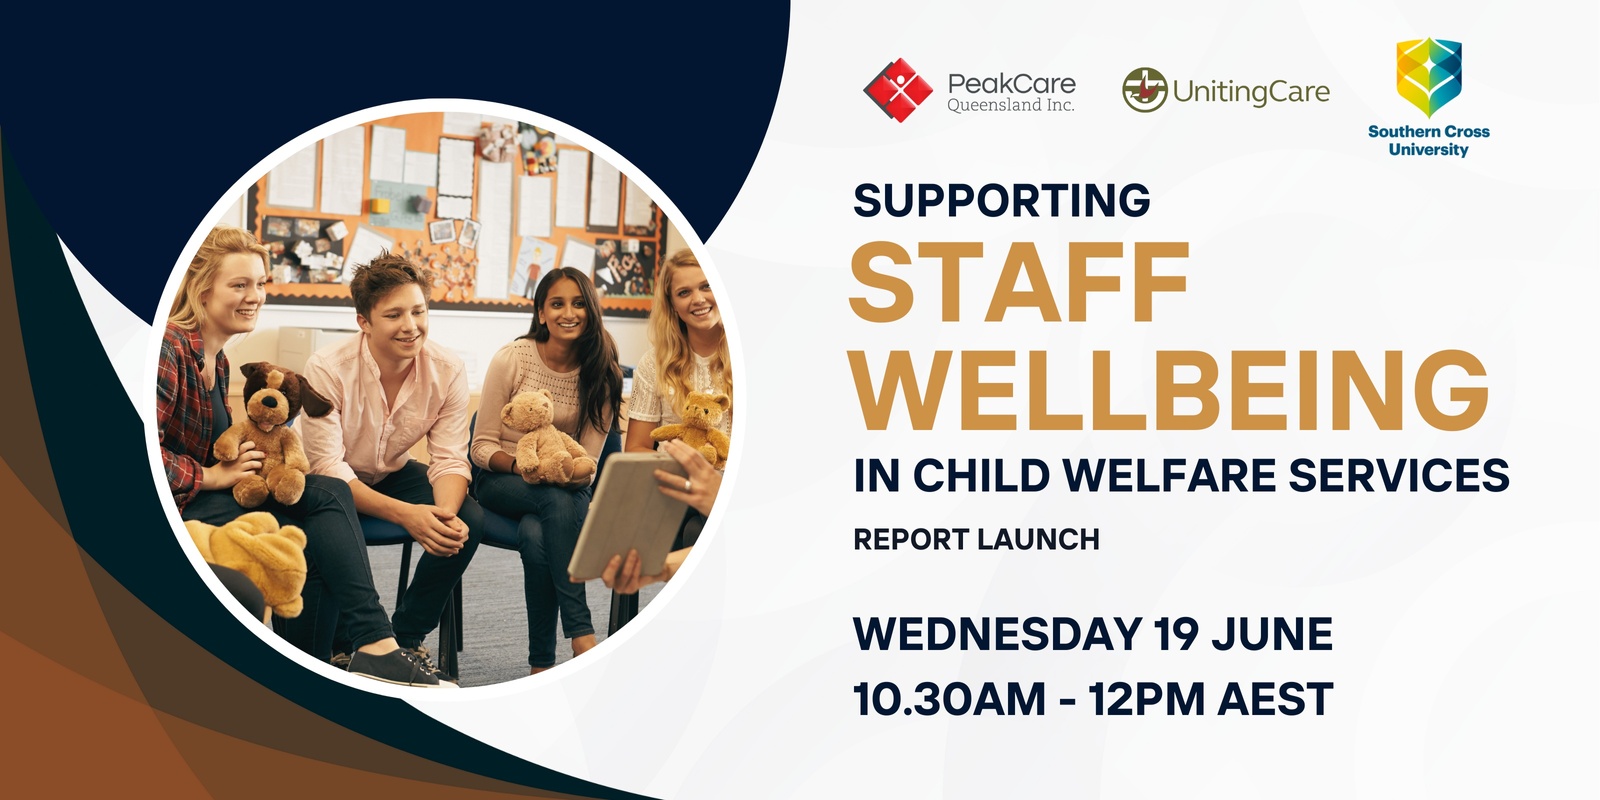 Banner image for PeakCare online launch event: Supporting Staff Wellbeing in Child Welfare Services report